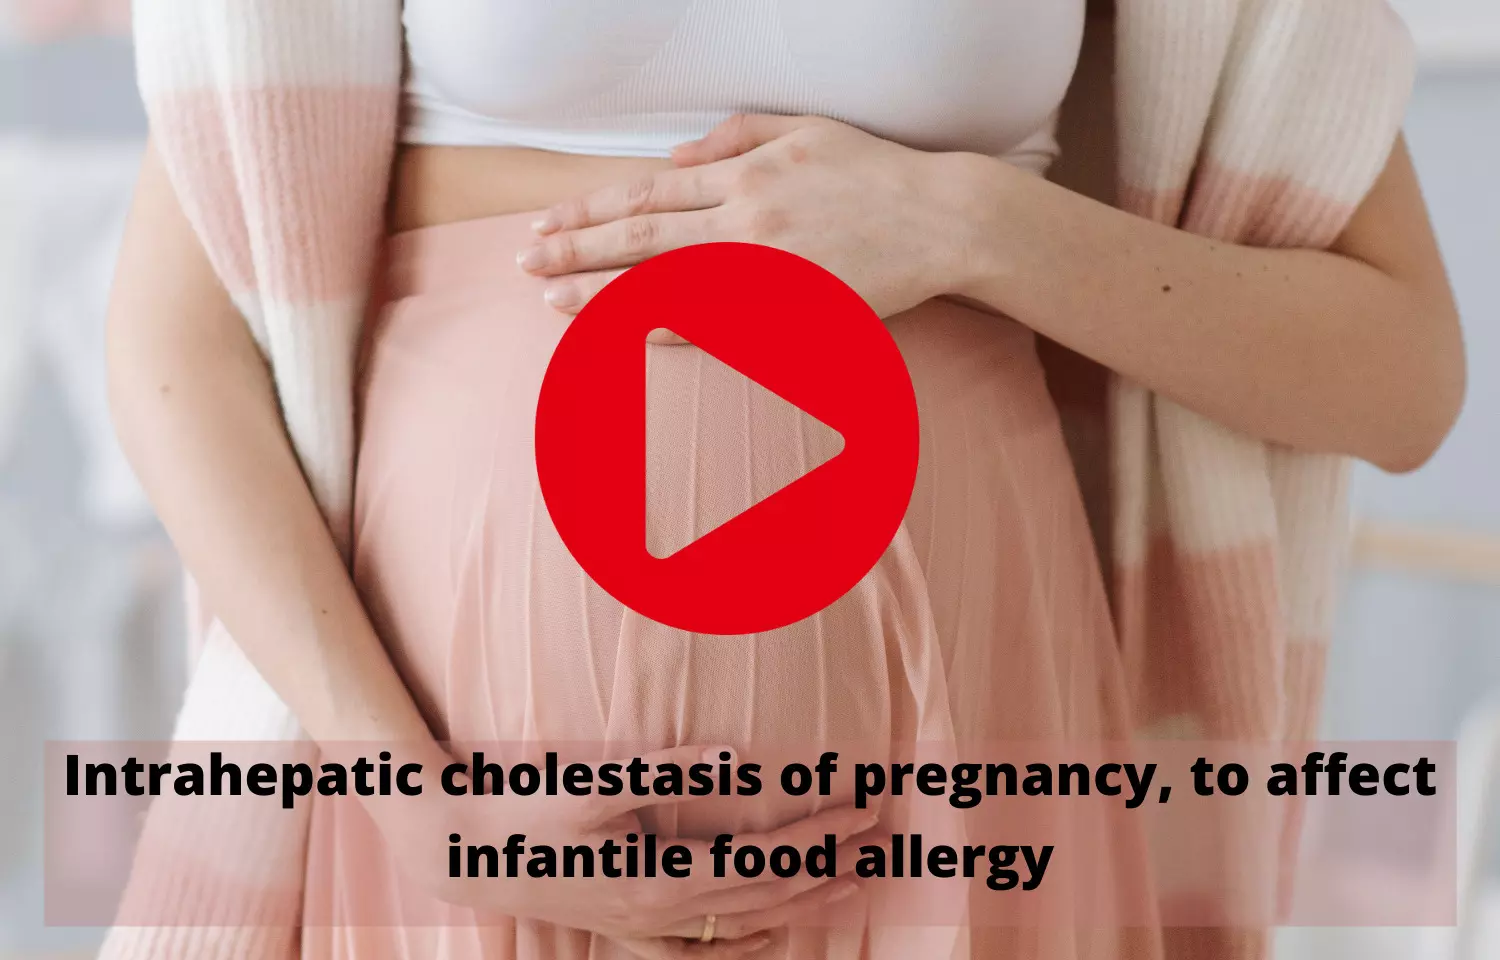 Infantile food allergy to be affected by Intrahepatic cholestasis of pregnancy